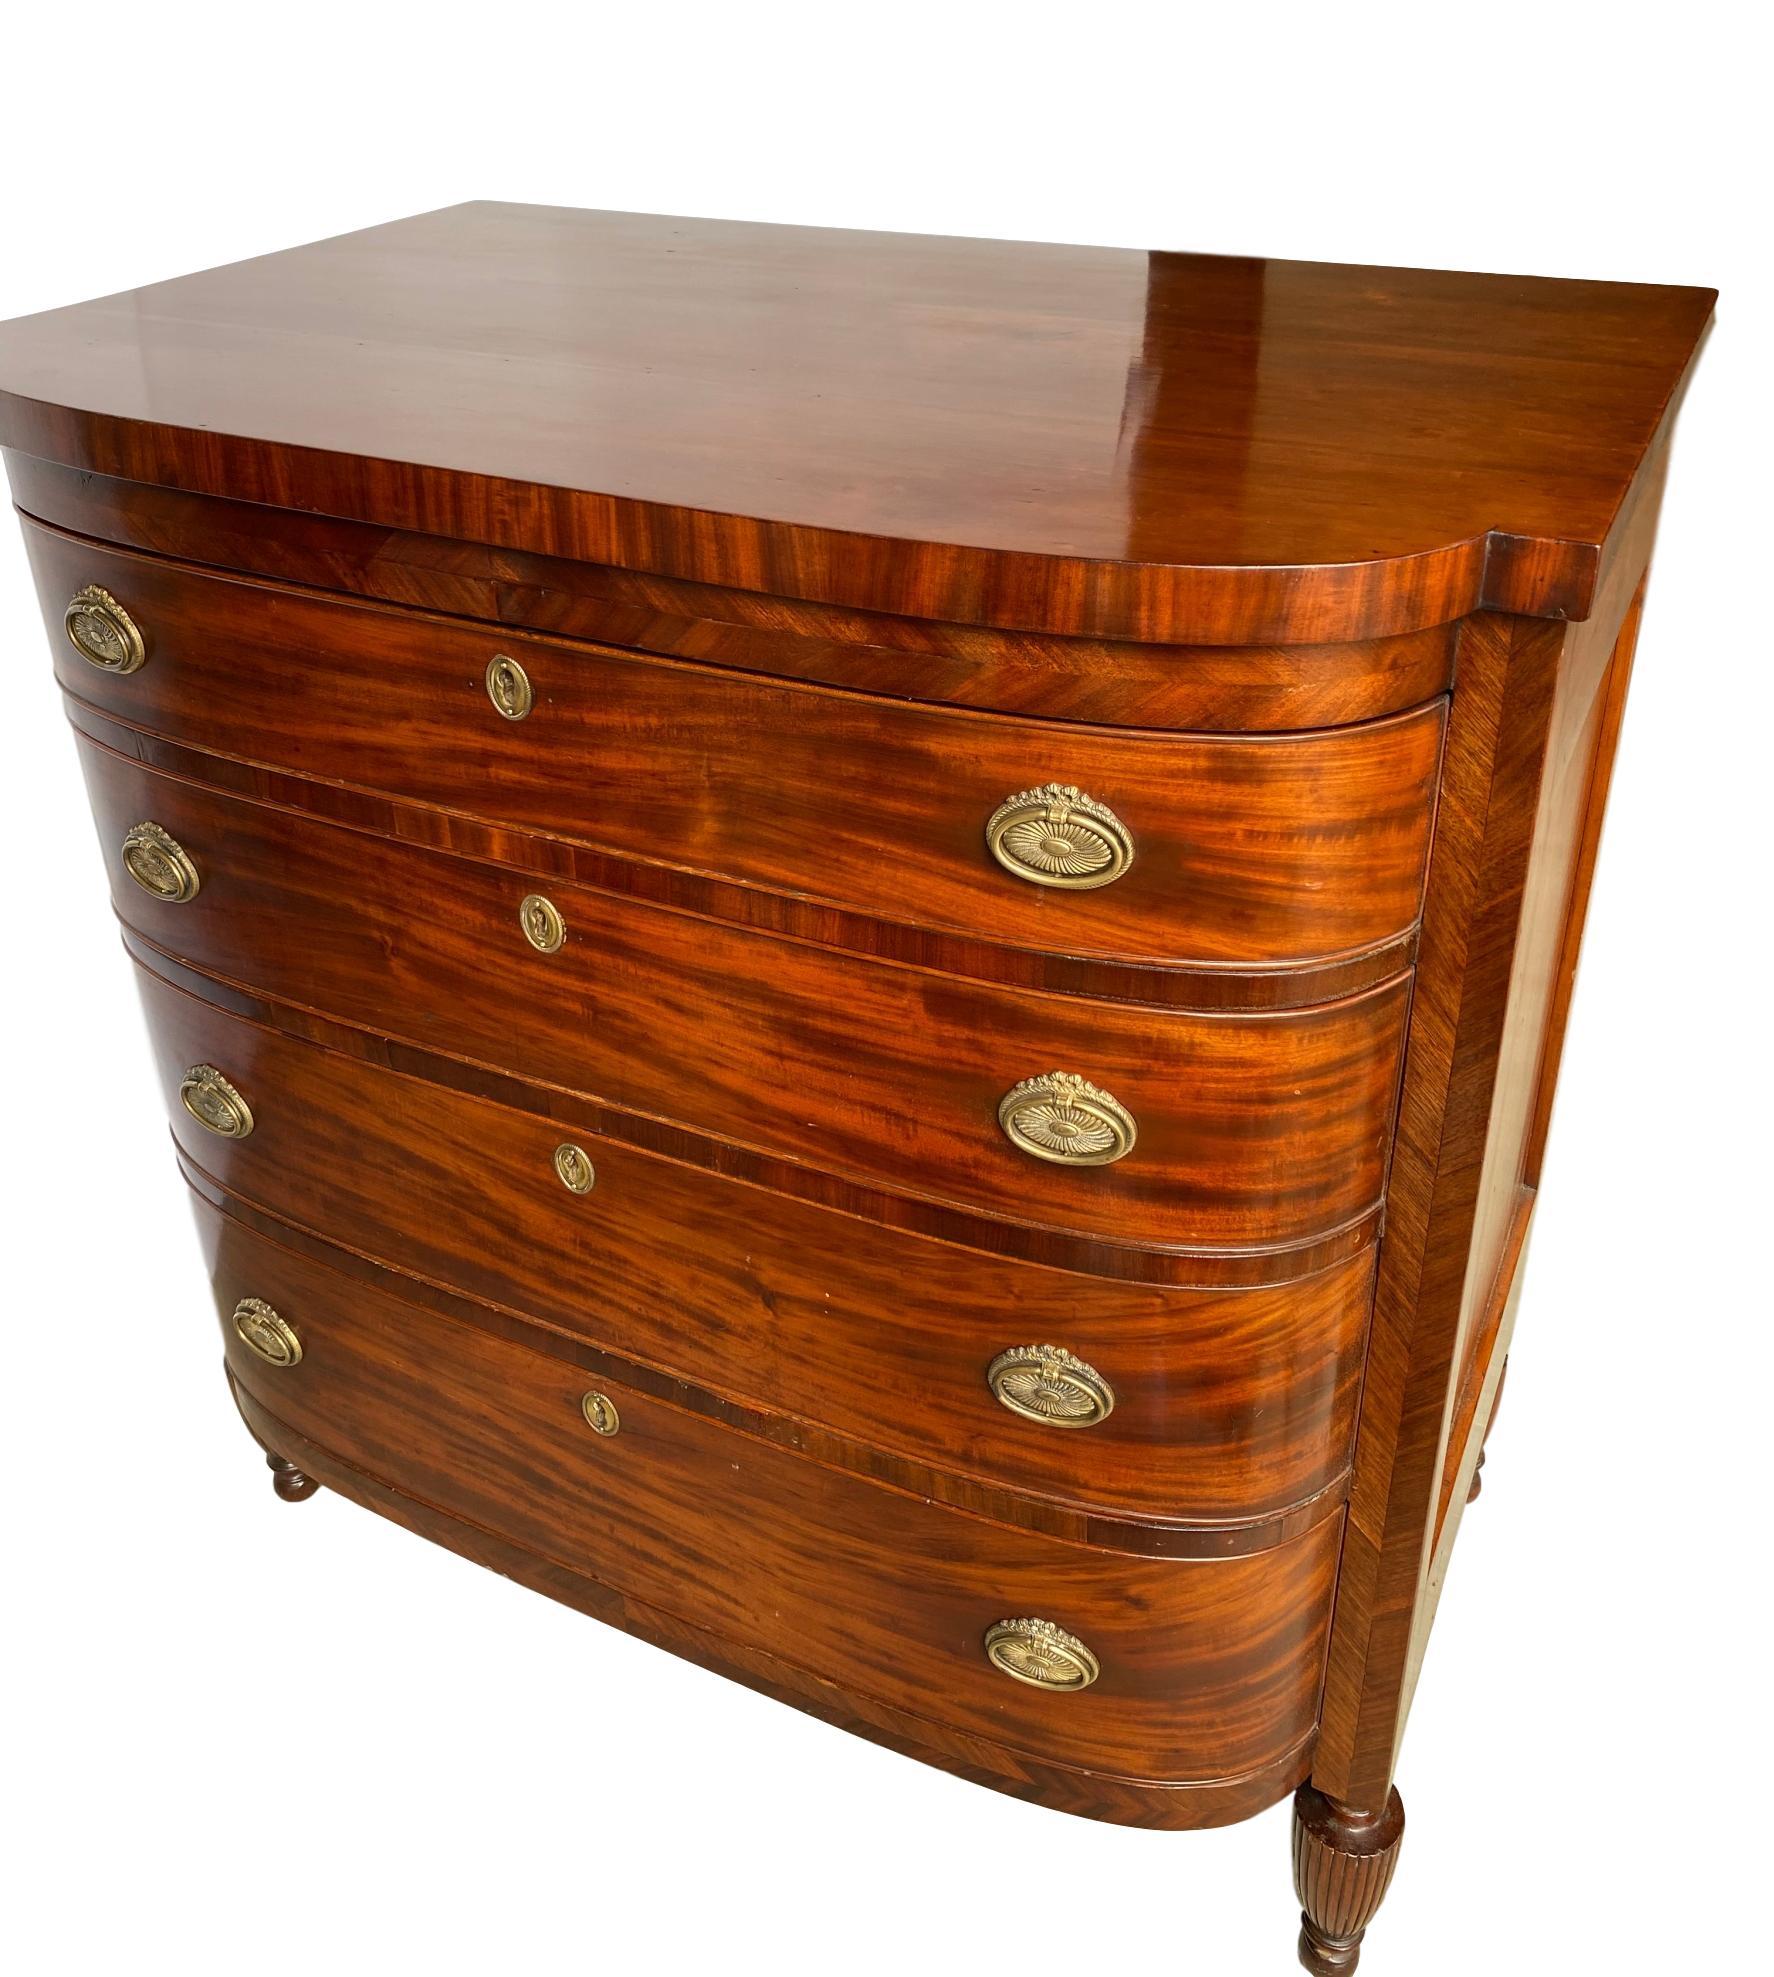 Hand-Crafted Flame Mahogany Bow-Front Chest-of-Drawers/Dresser, Scottish, circa 1860